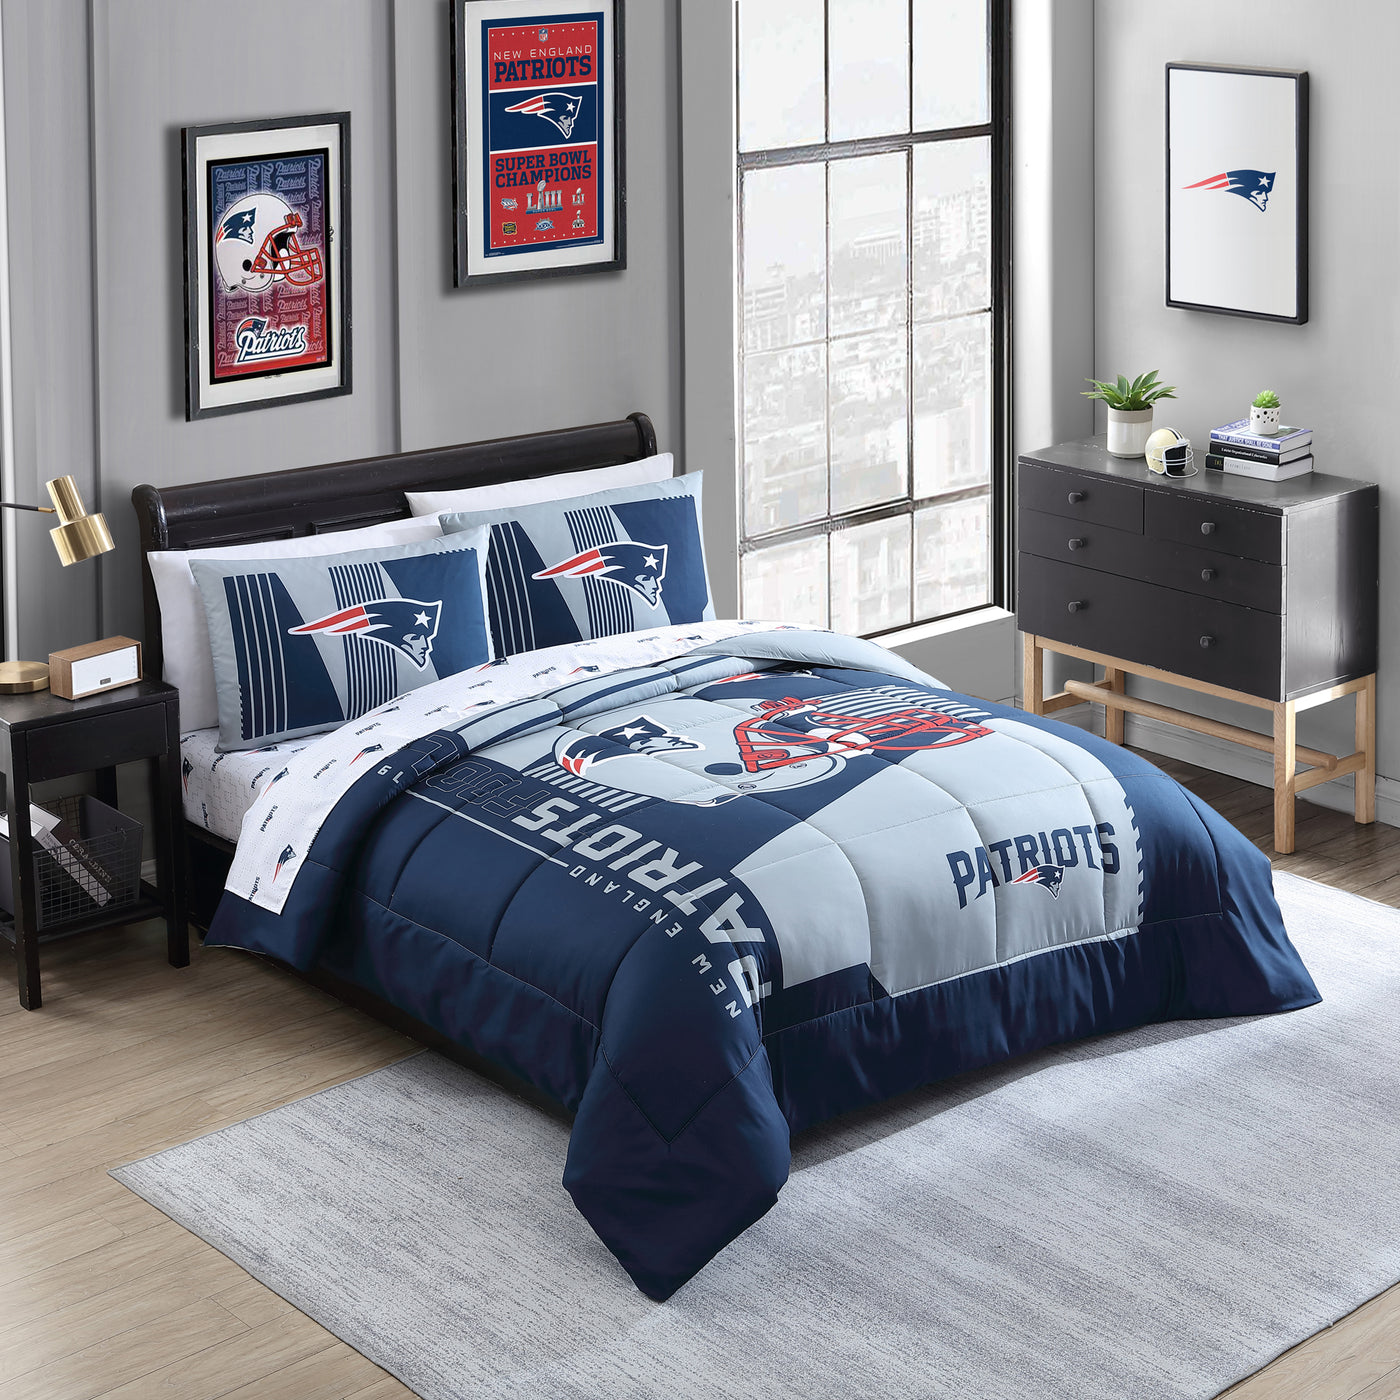 New England Patriots Status Bed In A Bag Full